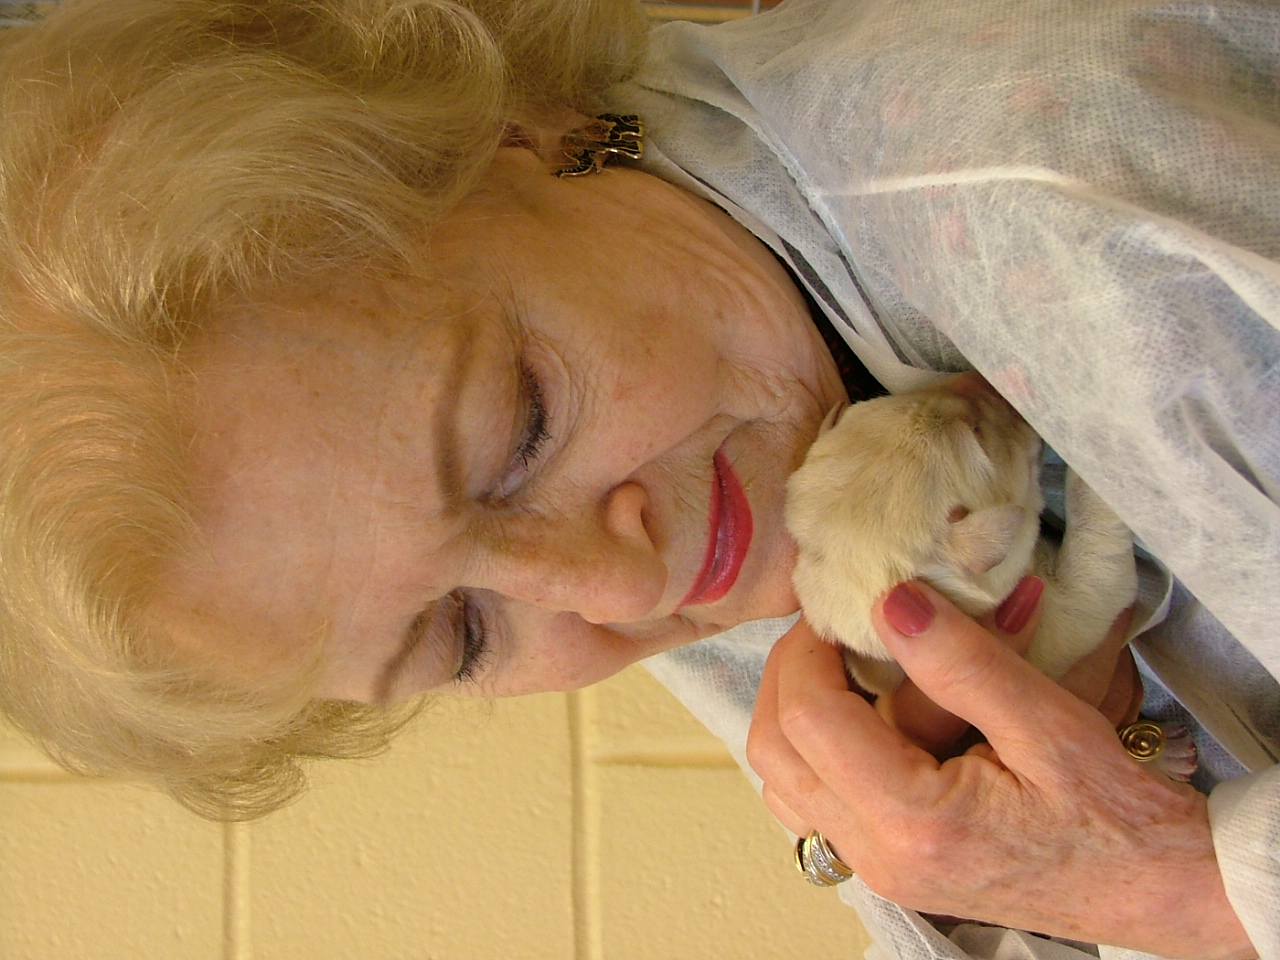 Betty cuddles a newborn yellow Lab to her chest and looks down, smiling as she pets the puppy.